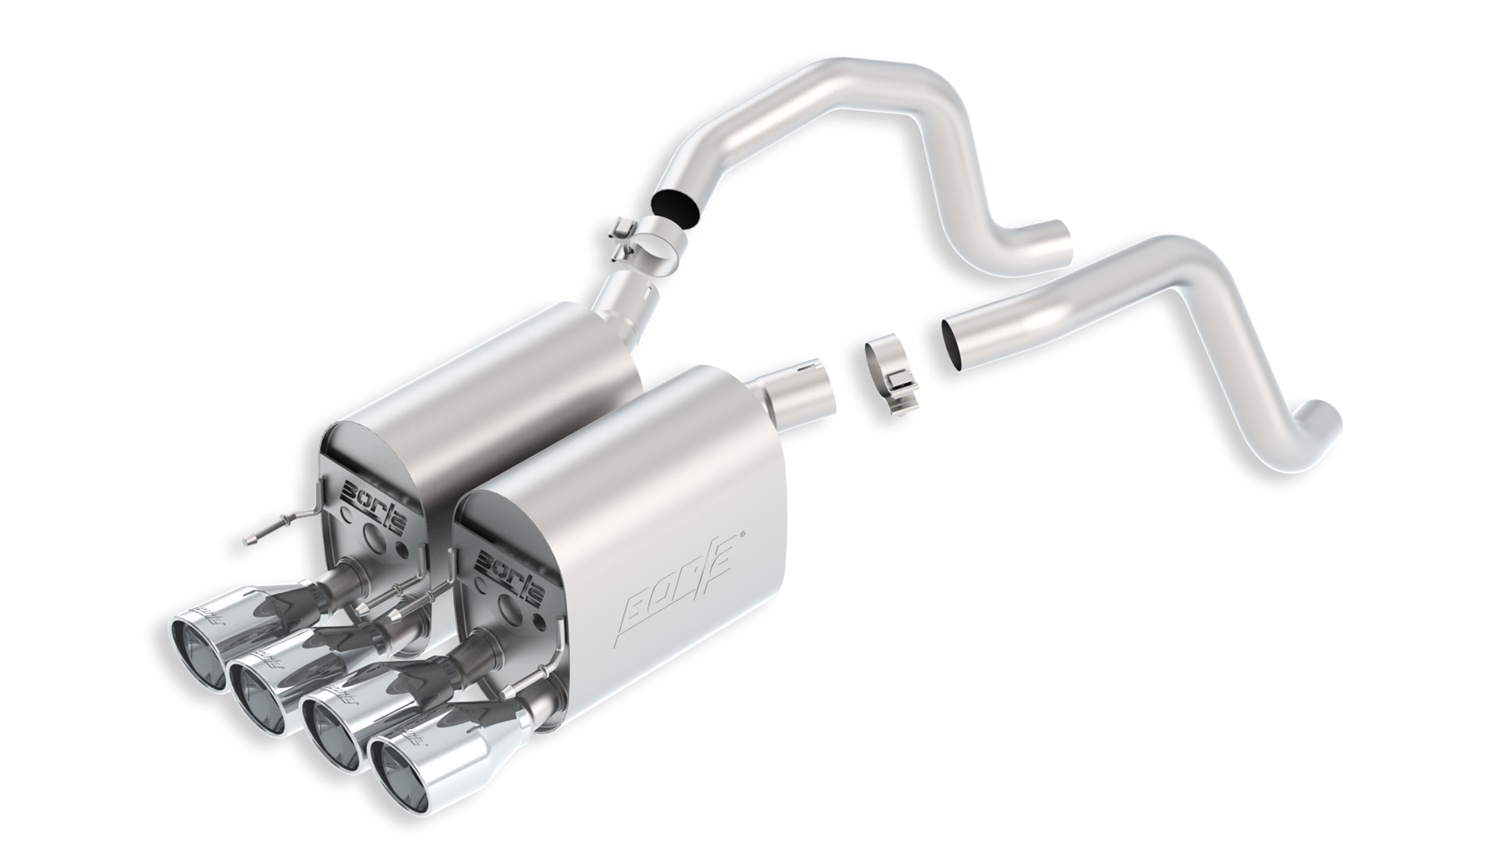 Borla 11814 Exhaust System, Touring, Axle-Back, 2-1/2 in Diameter, Dual Center Exit, Quad 4 in Polished Tips, Stainless, Natural, GM LS-Series, Chevy Corvette 2005-08, Kit